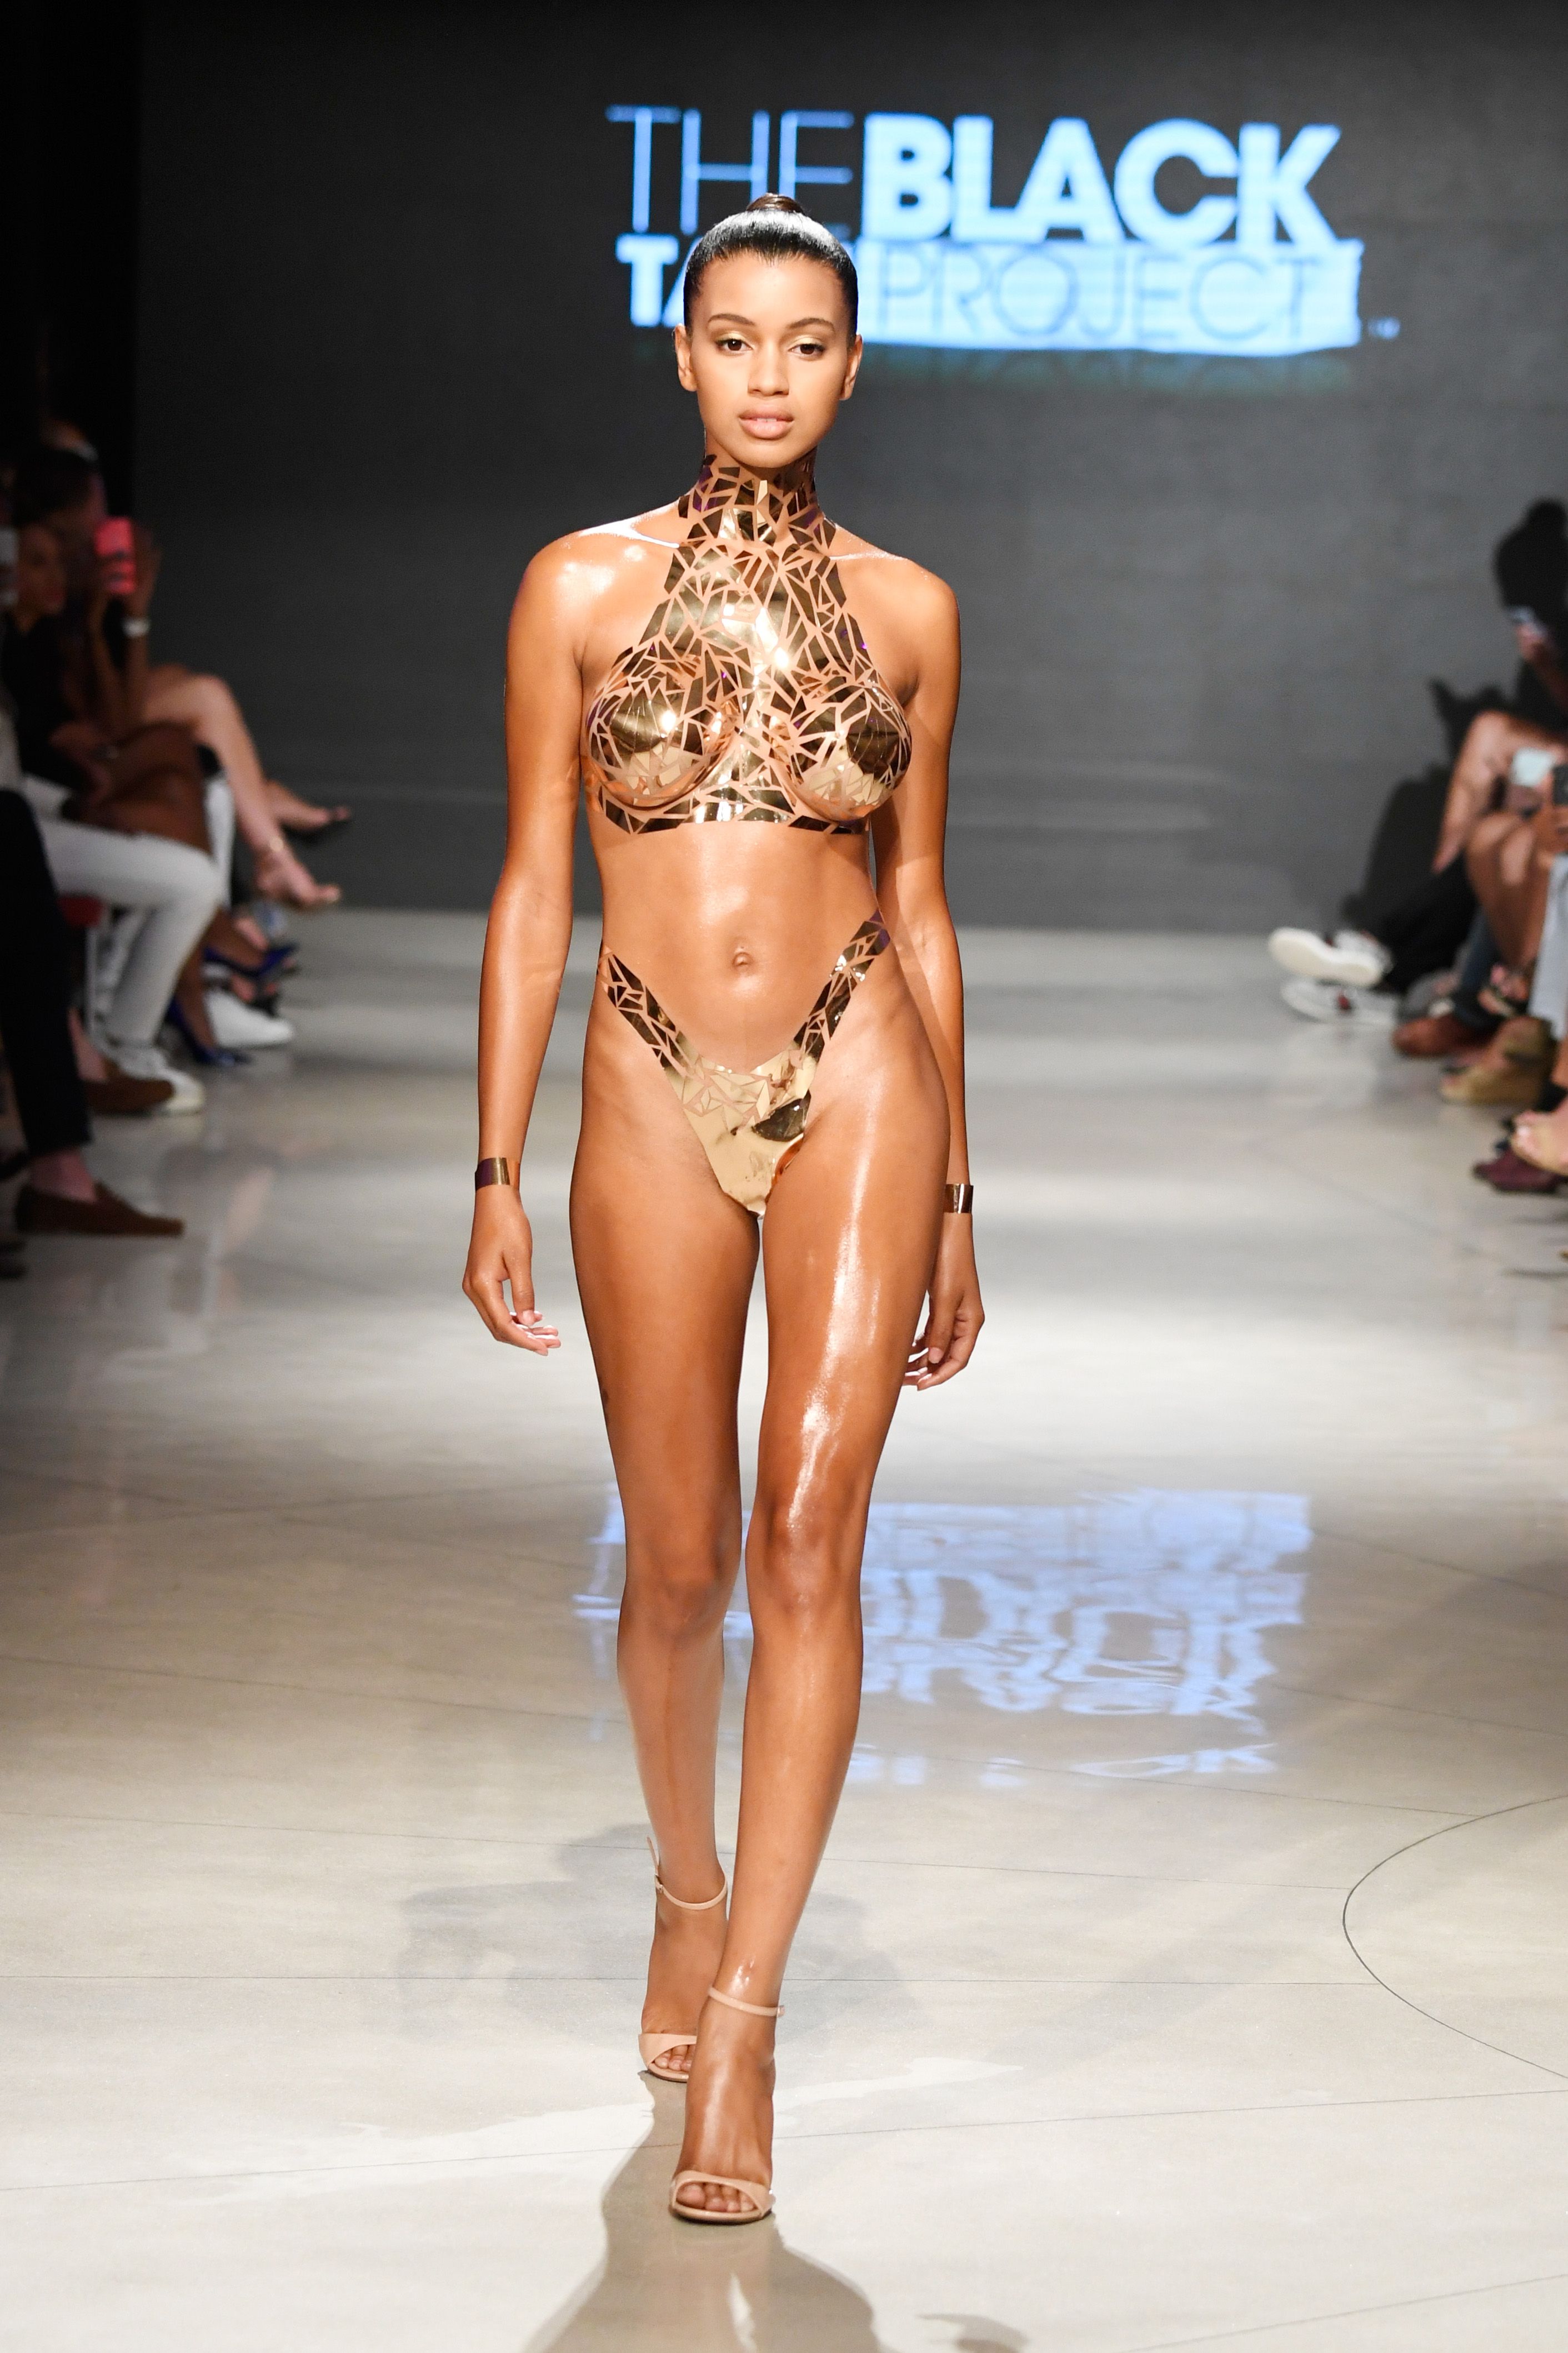 2823px x 4235px - Nearly Naked Metallic Tape Swimsuits Exist - All About the Black Tape  Project Maimi Swim Week Show